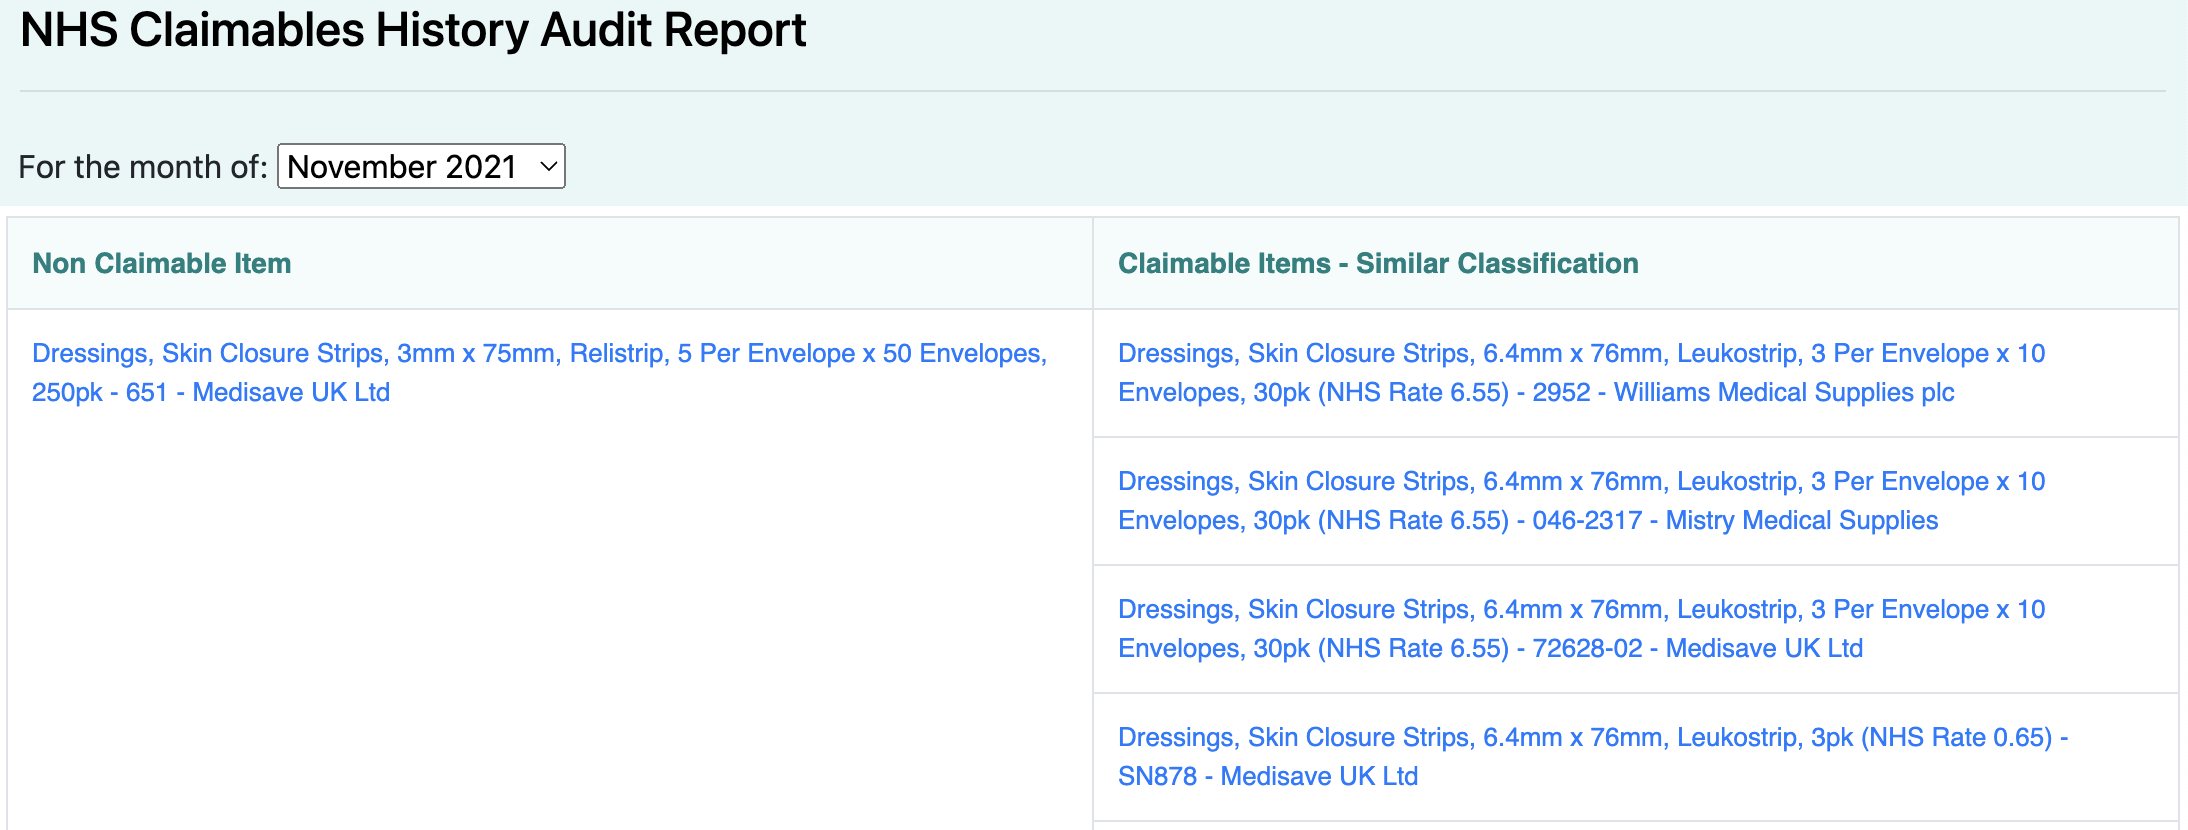 The NHS Claimables History Audit Report